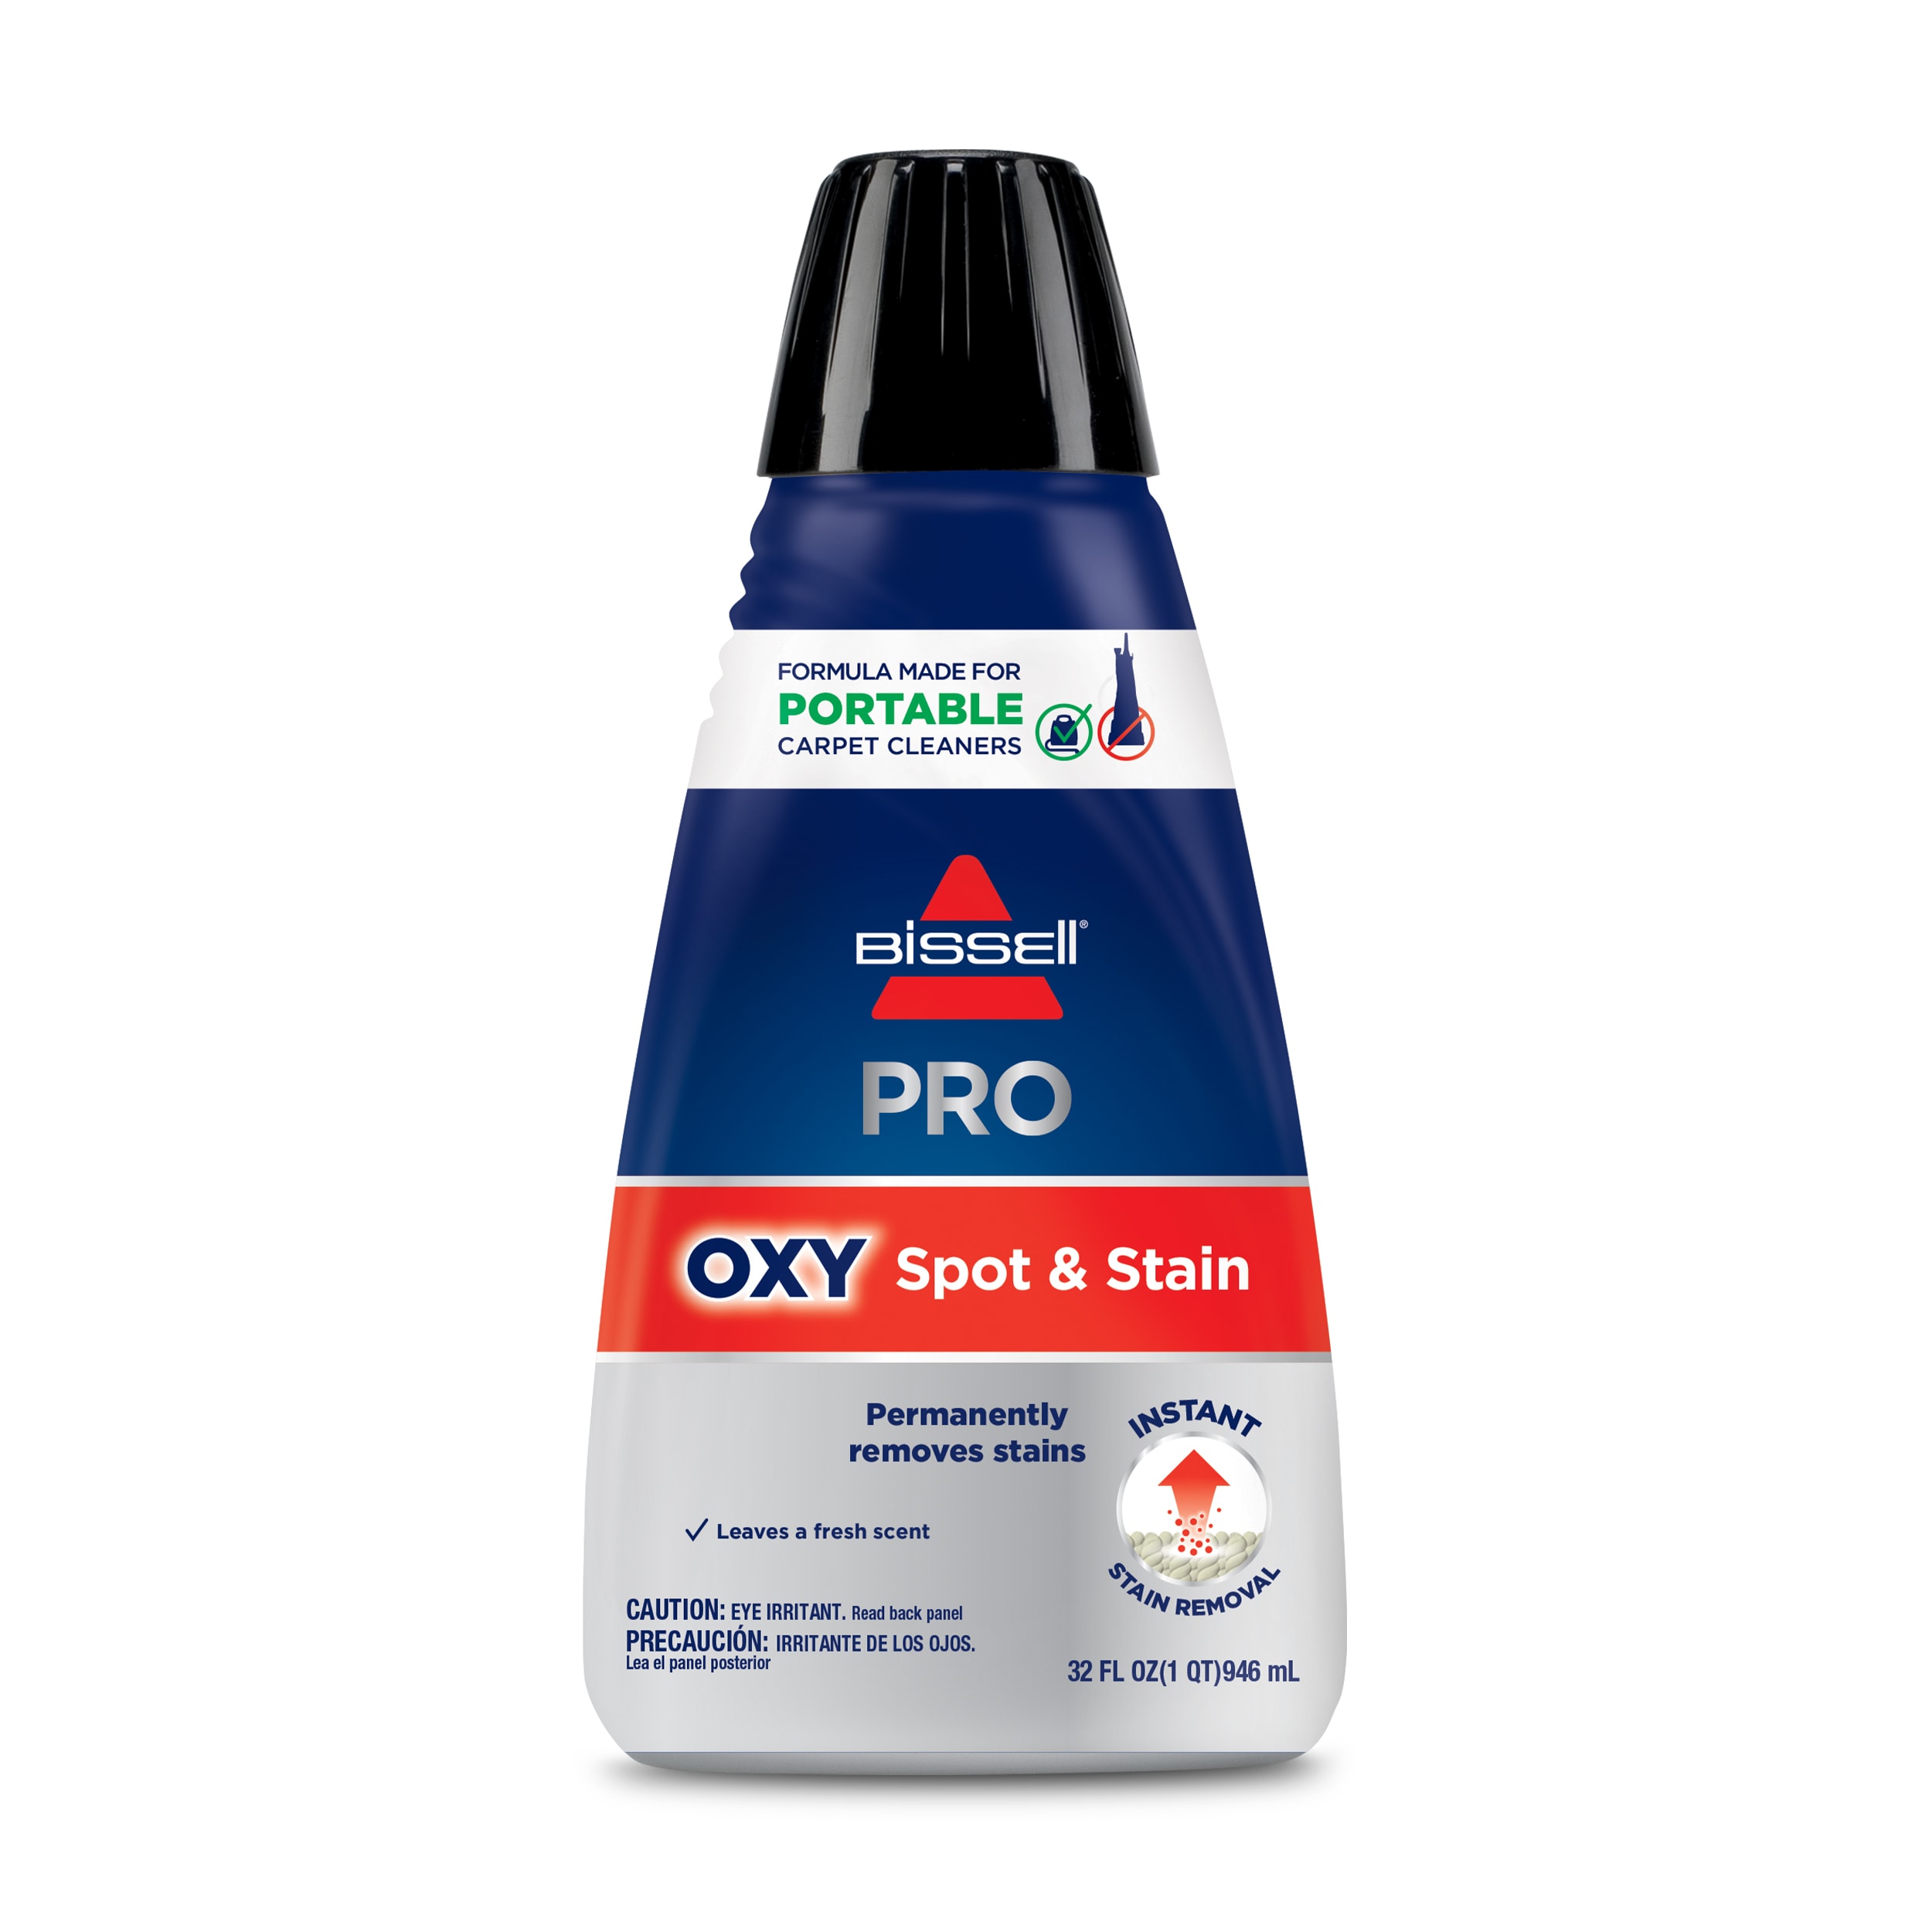 Bissell Professional Spot & Stain Remover - 32 fl oz bottle